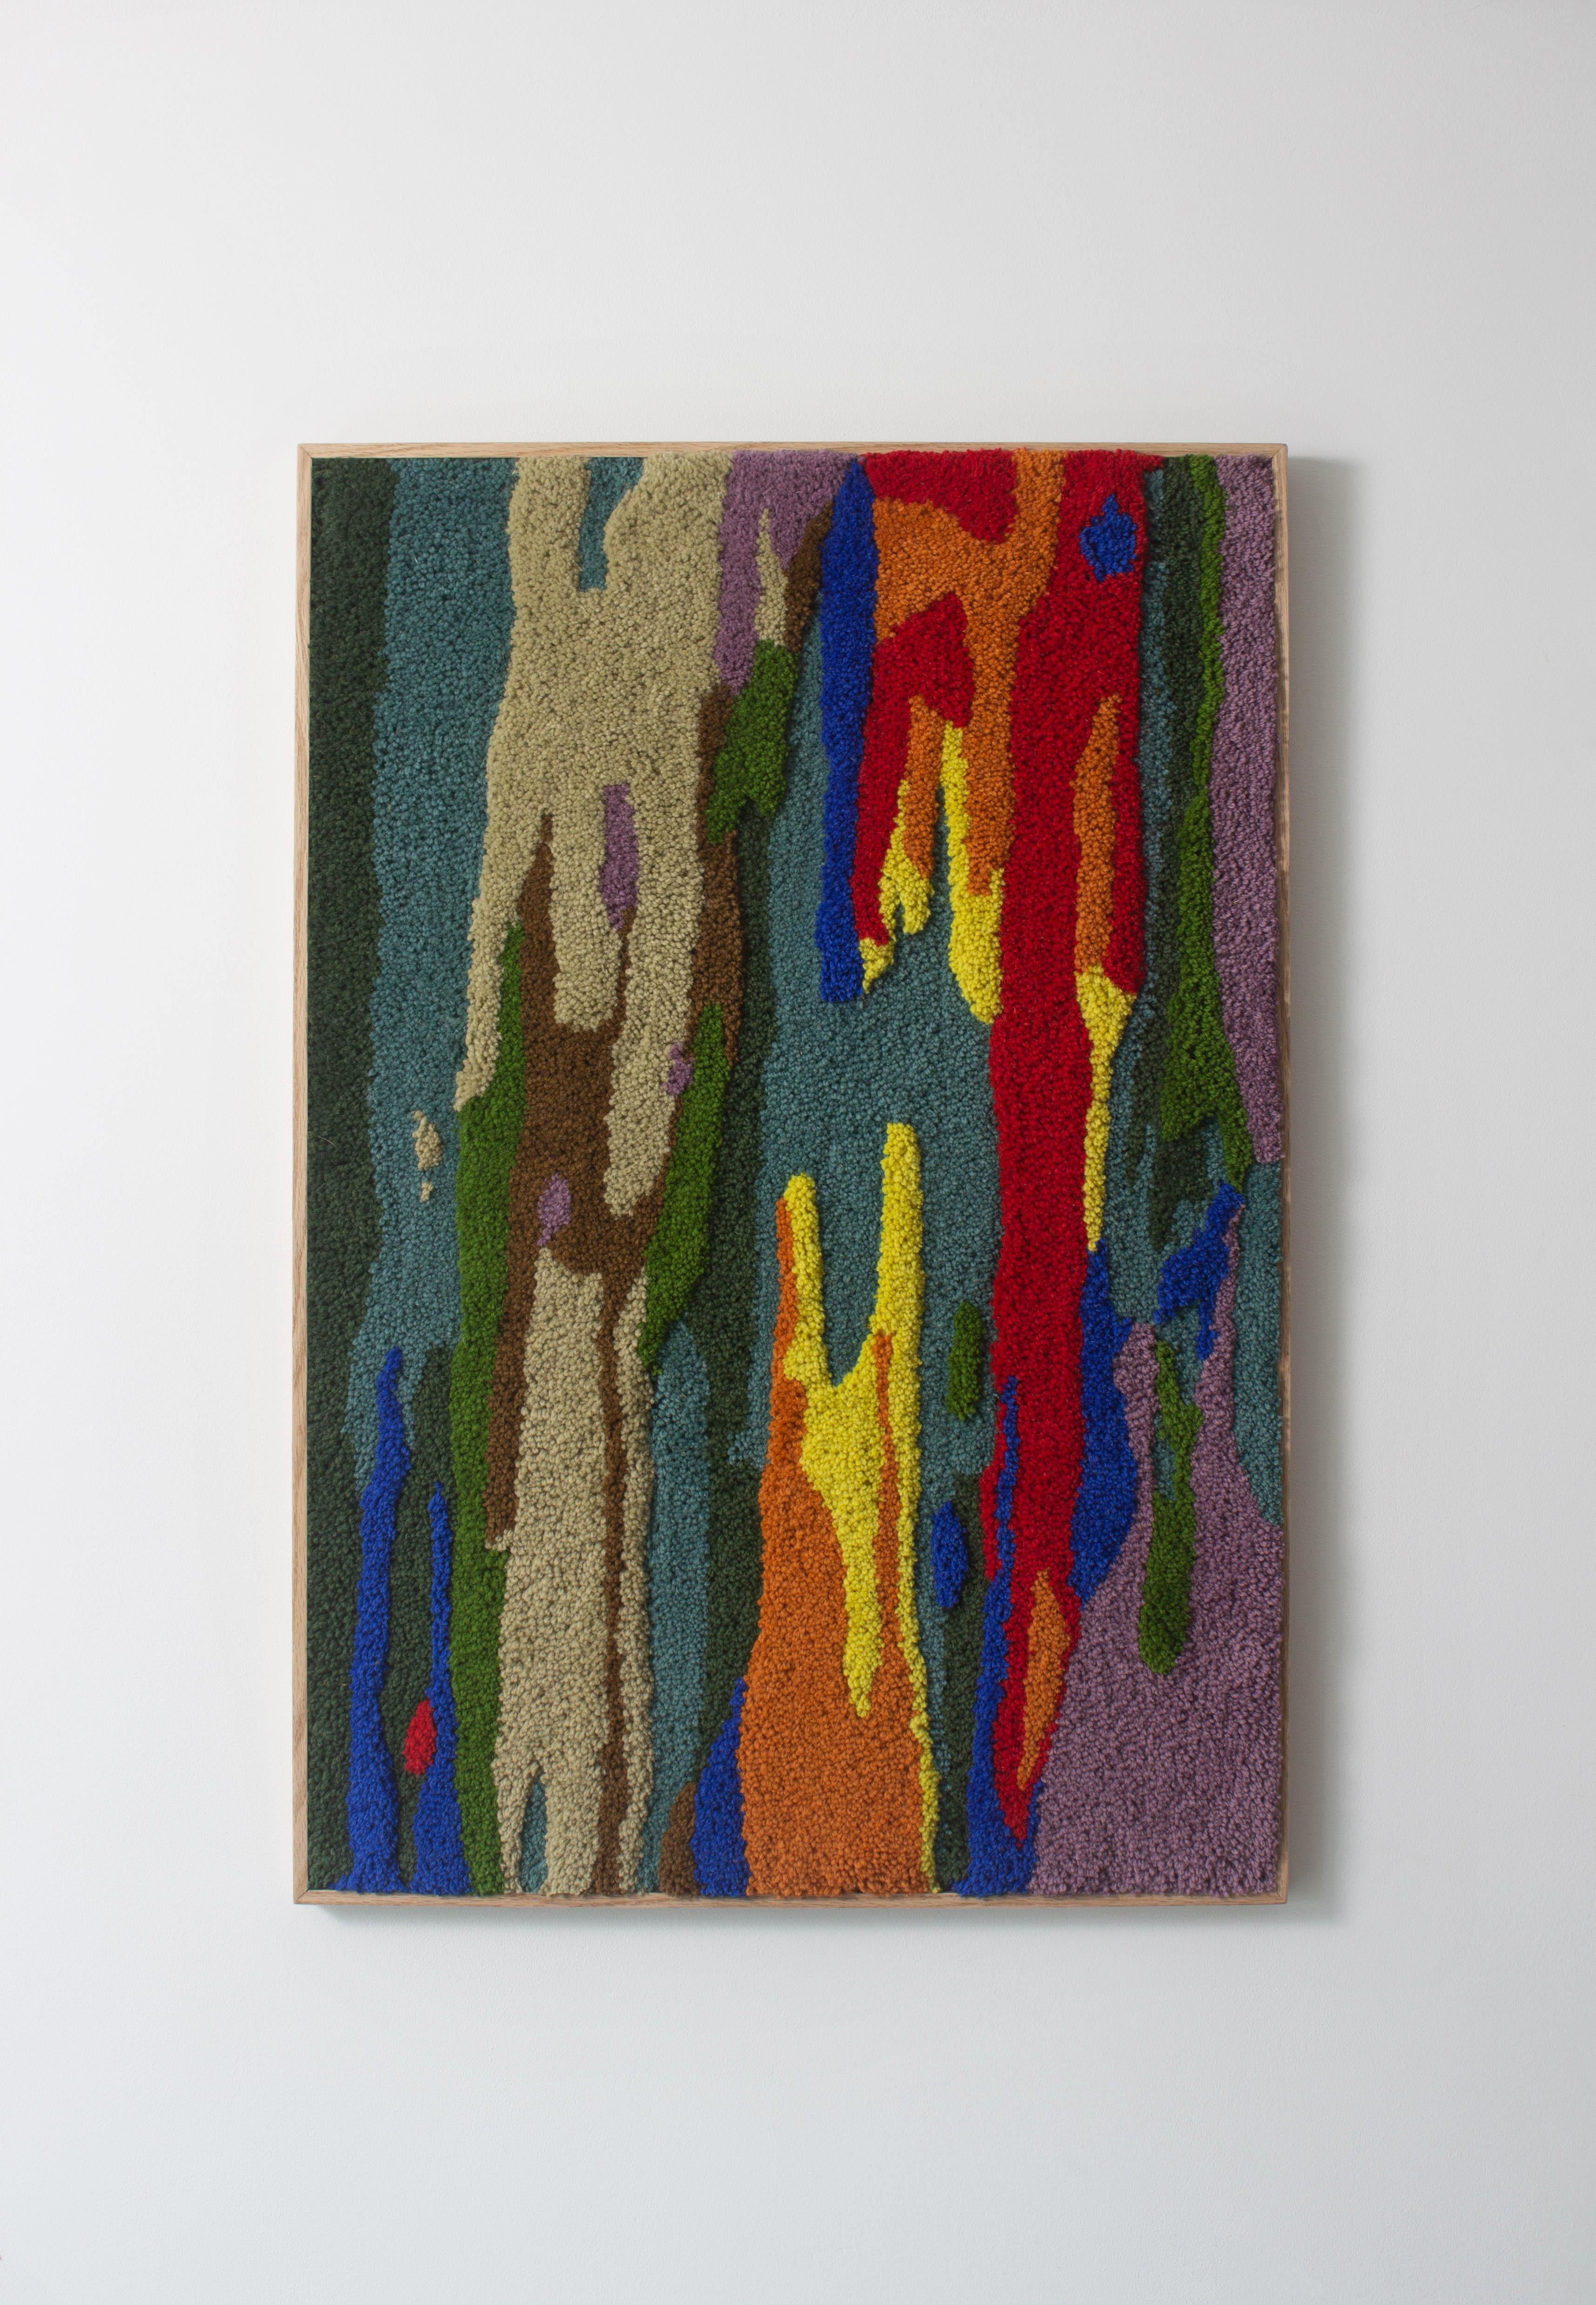 Inspired by nature, Abstract Rainbow Landscape is a one of a kind artwork and a representation of happy moments of life. Handmade with 100% Portuguese wool yarn, using tufting gun and carving techniques. The oak frame is produced by the studio. It